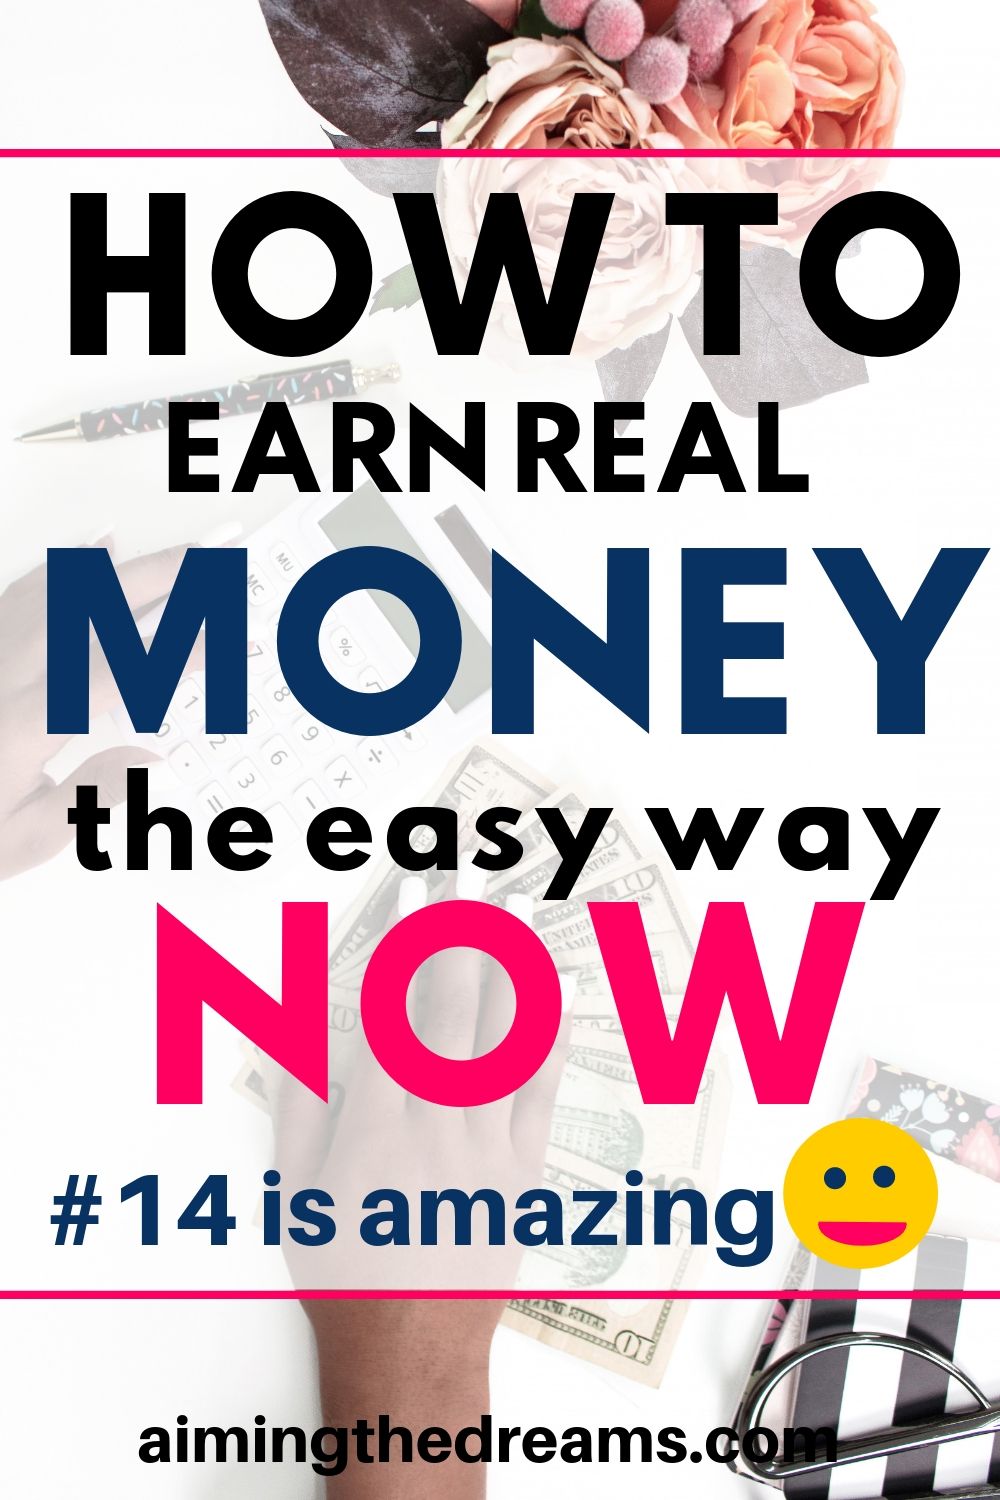 How to earn real income the easy way now. These side hustles and side income ideas let you work from home and earn make money